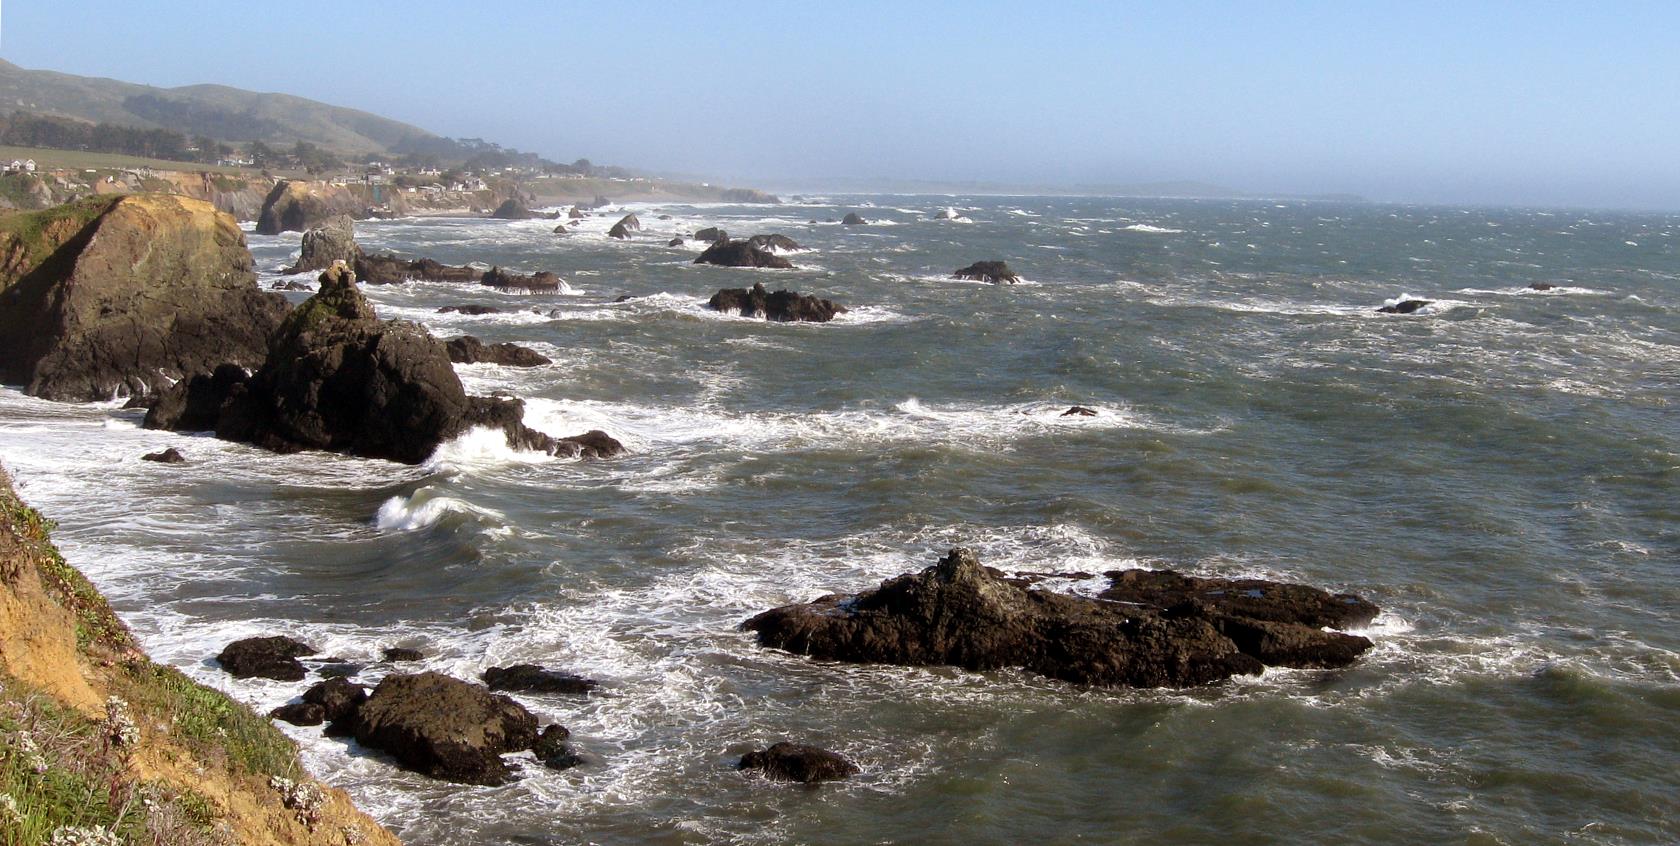 Over rough seas, in the hazy distance across the Sonoma shore, is Bodega Head. That is a special place for me.